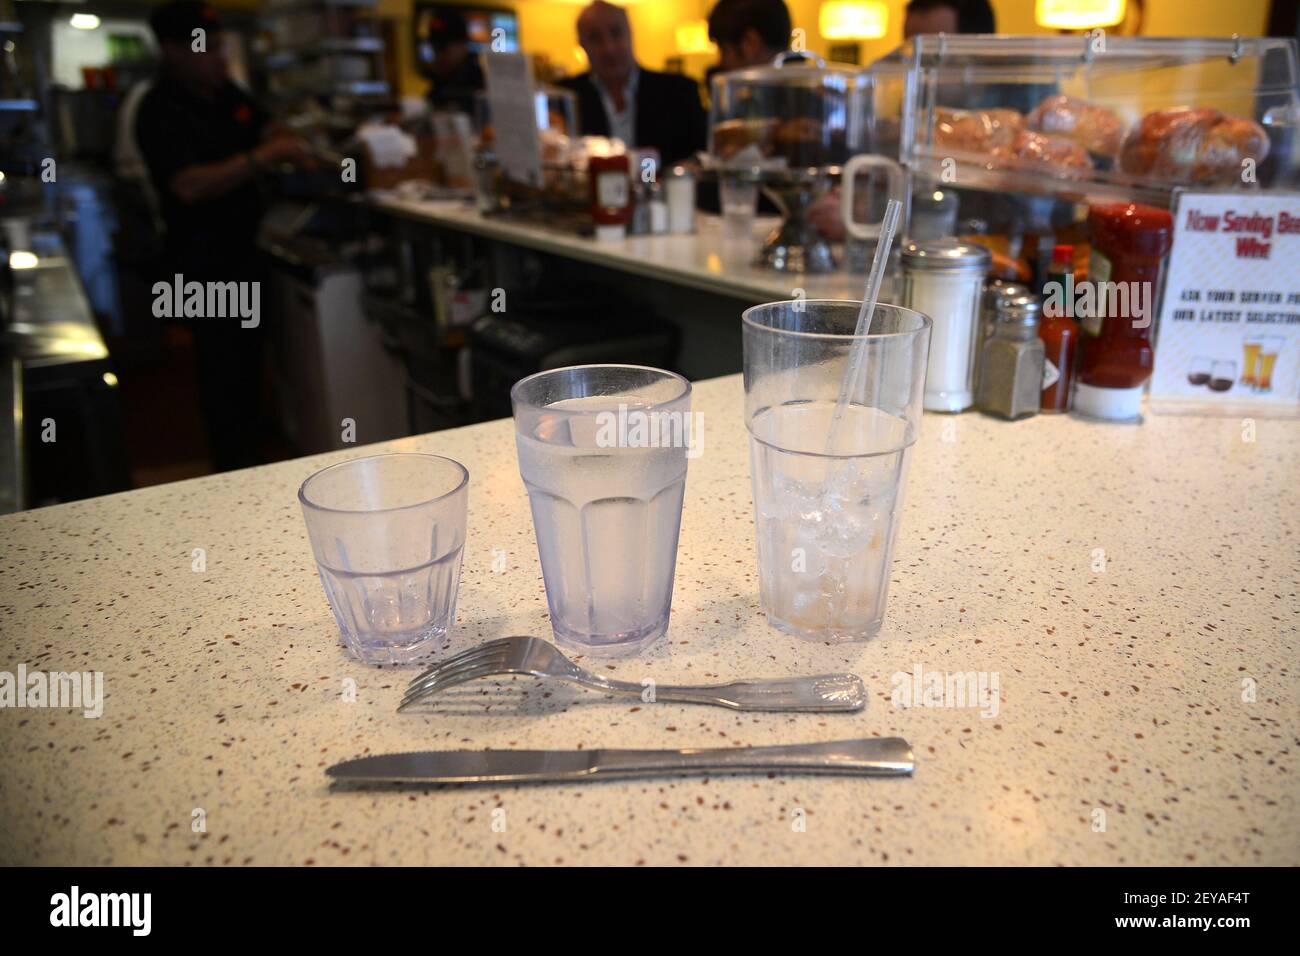 Three cup sizes, 5.5 ounce, 10 ounce and 16 ounce cup sizes drinks that  will be offered to customers at Lucky's Cafe in Midtown Manhattan, in New  York, NY on March 12